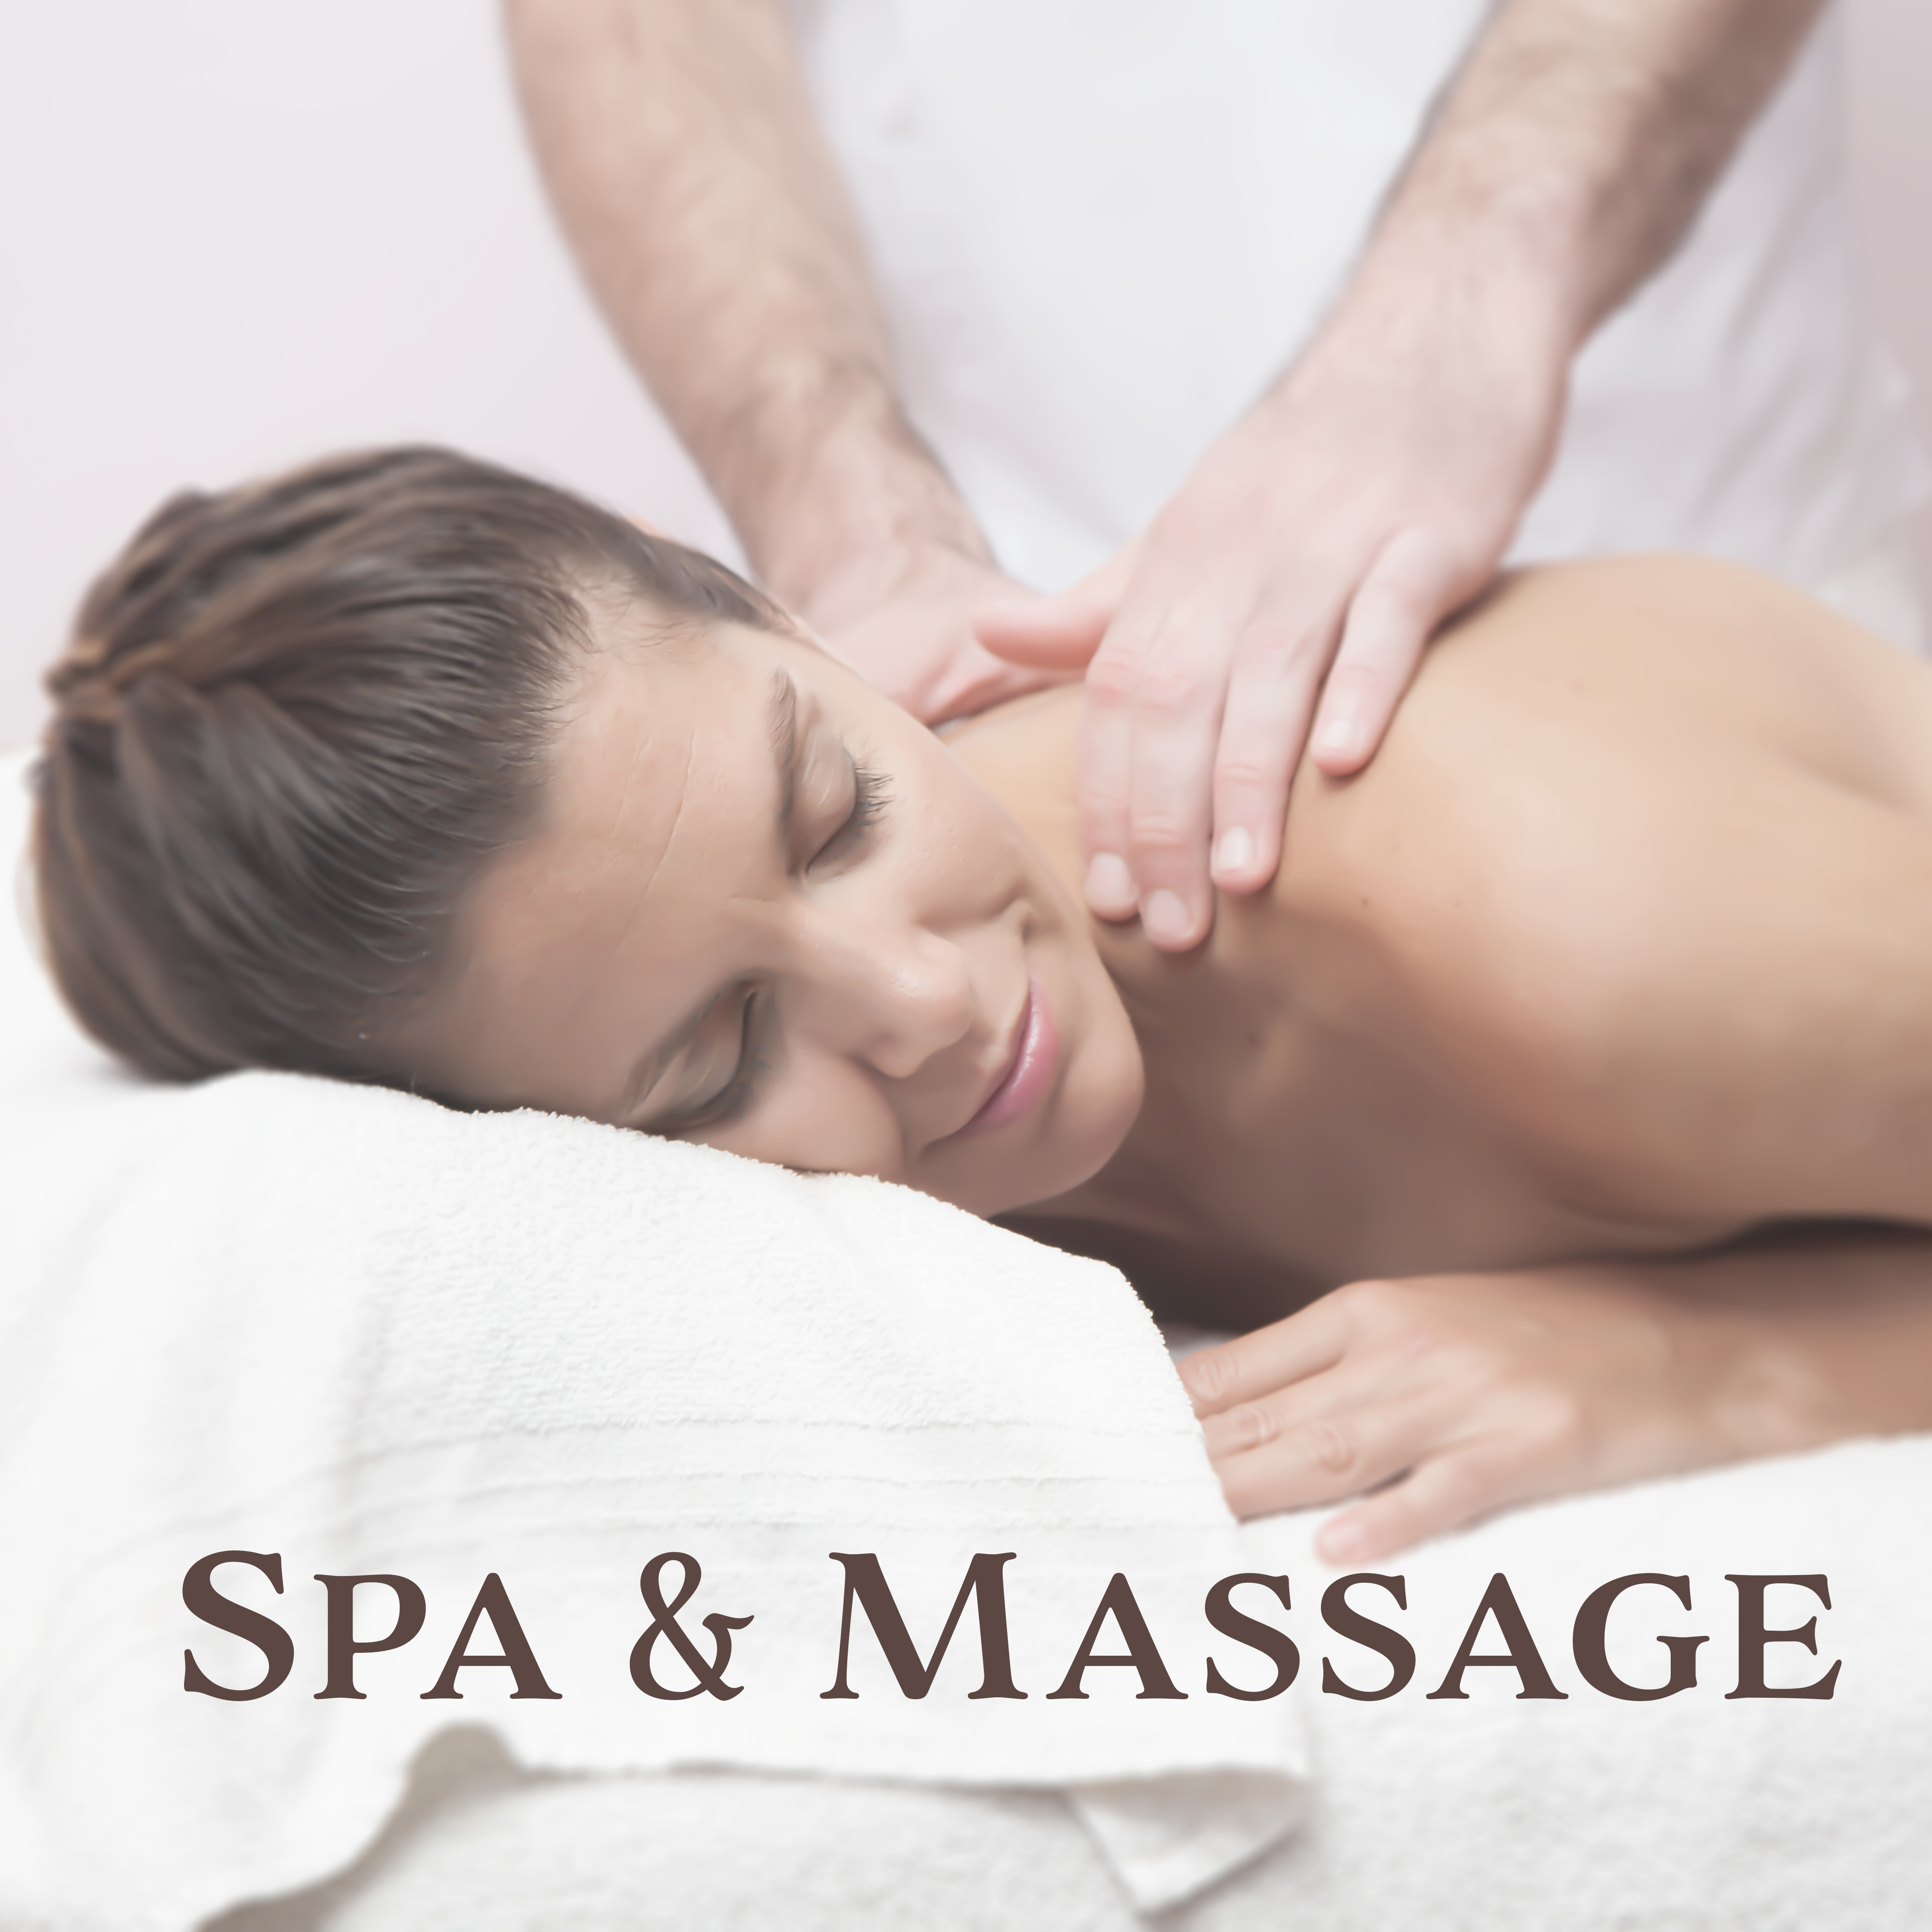 Spa  Massage  Peaceful Music for Wellness, Spa Dreams, Pure Massage, Stress Relief, Zen, Relaxing Therapy, Calm Mind